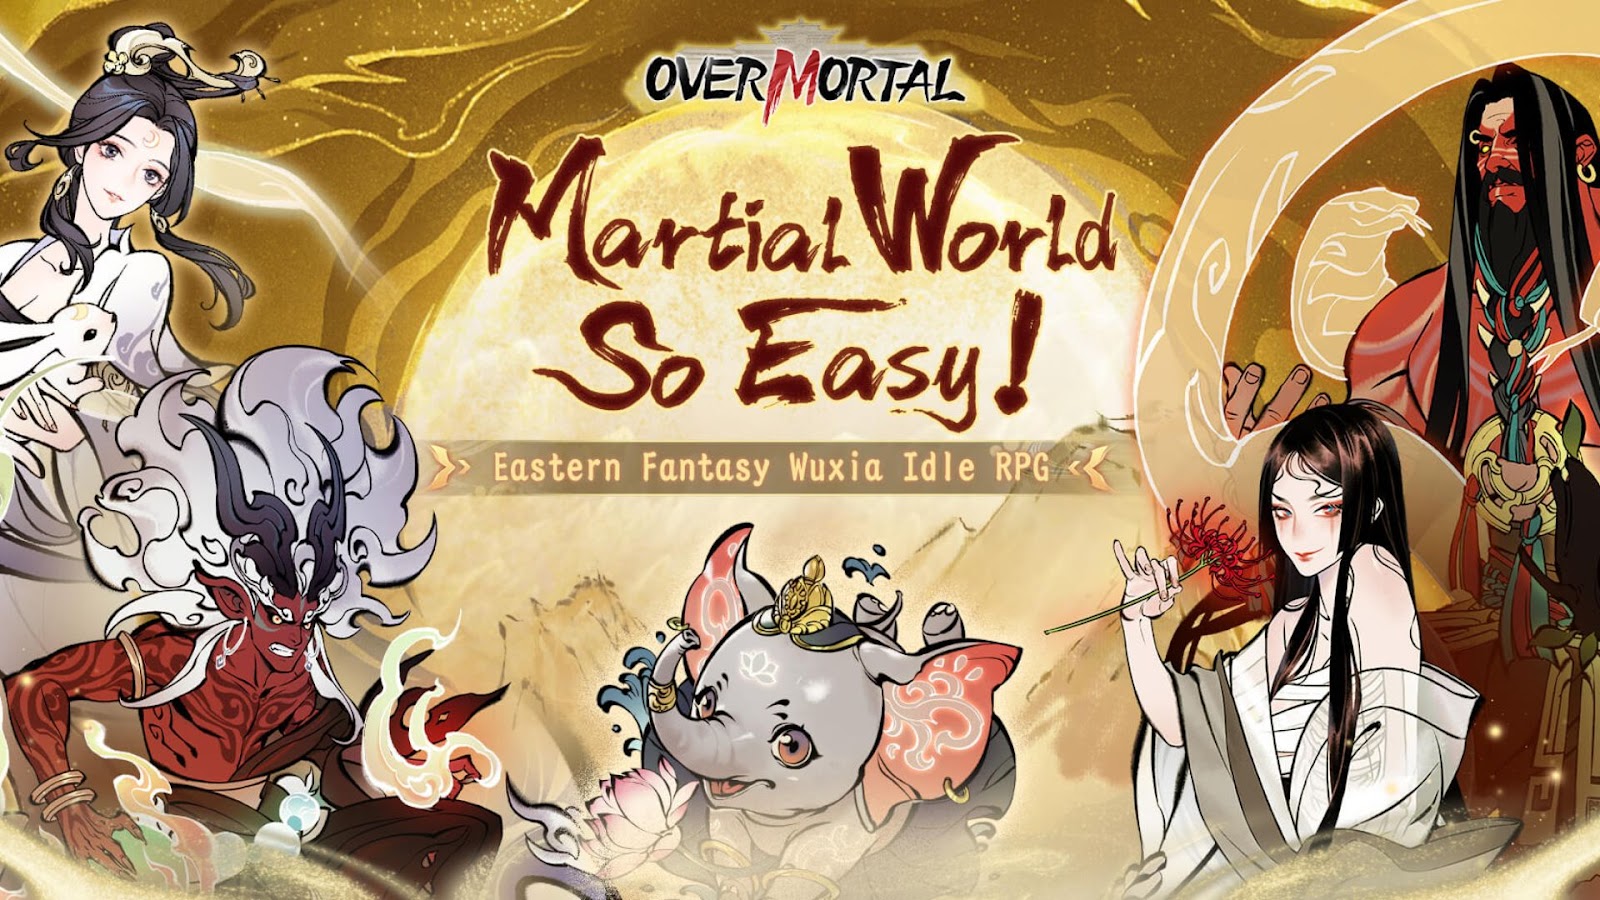 Eastern Fantasy Wuxia Idle RPG - Overmortal Beginner Guide